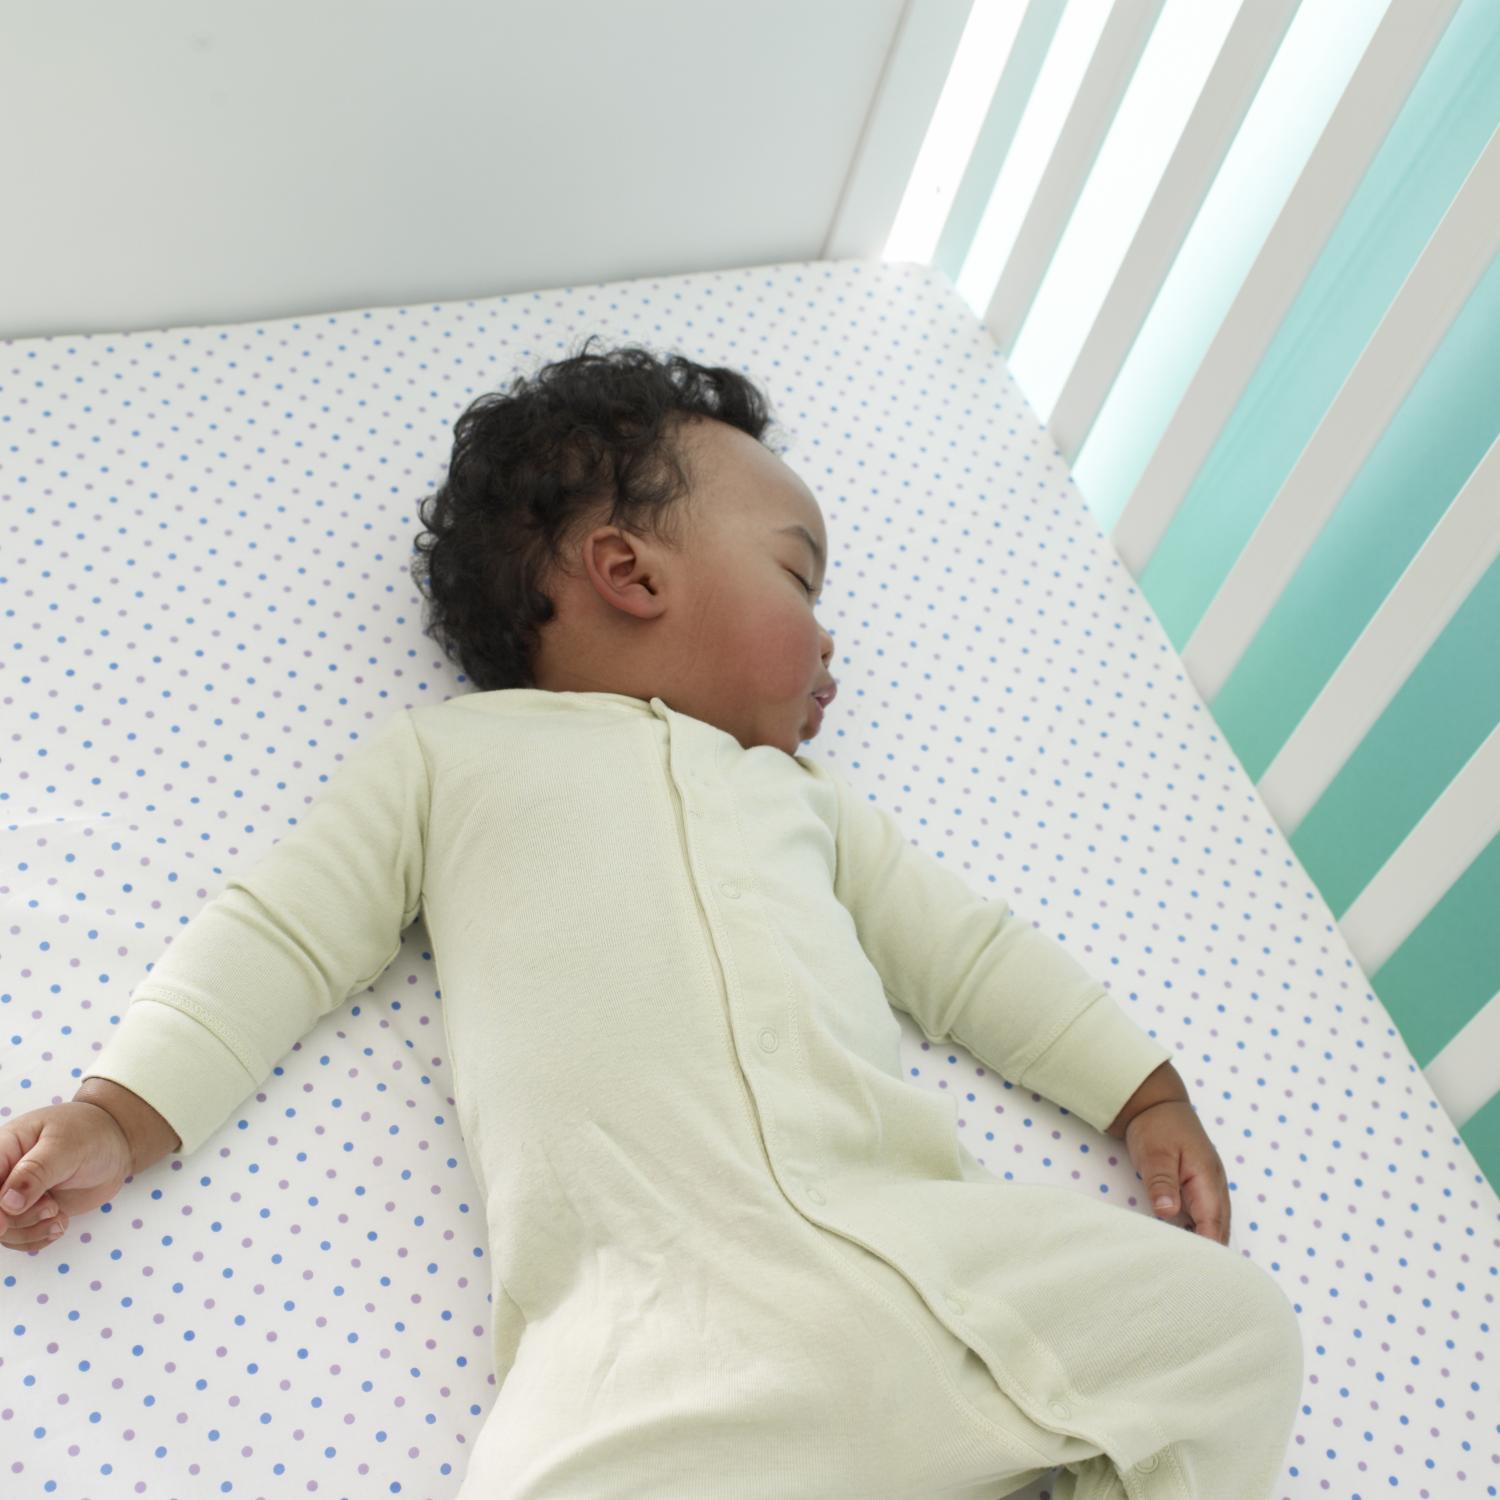 How to get your baby to sleep in crib